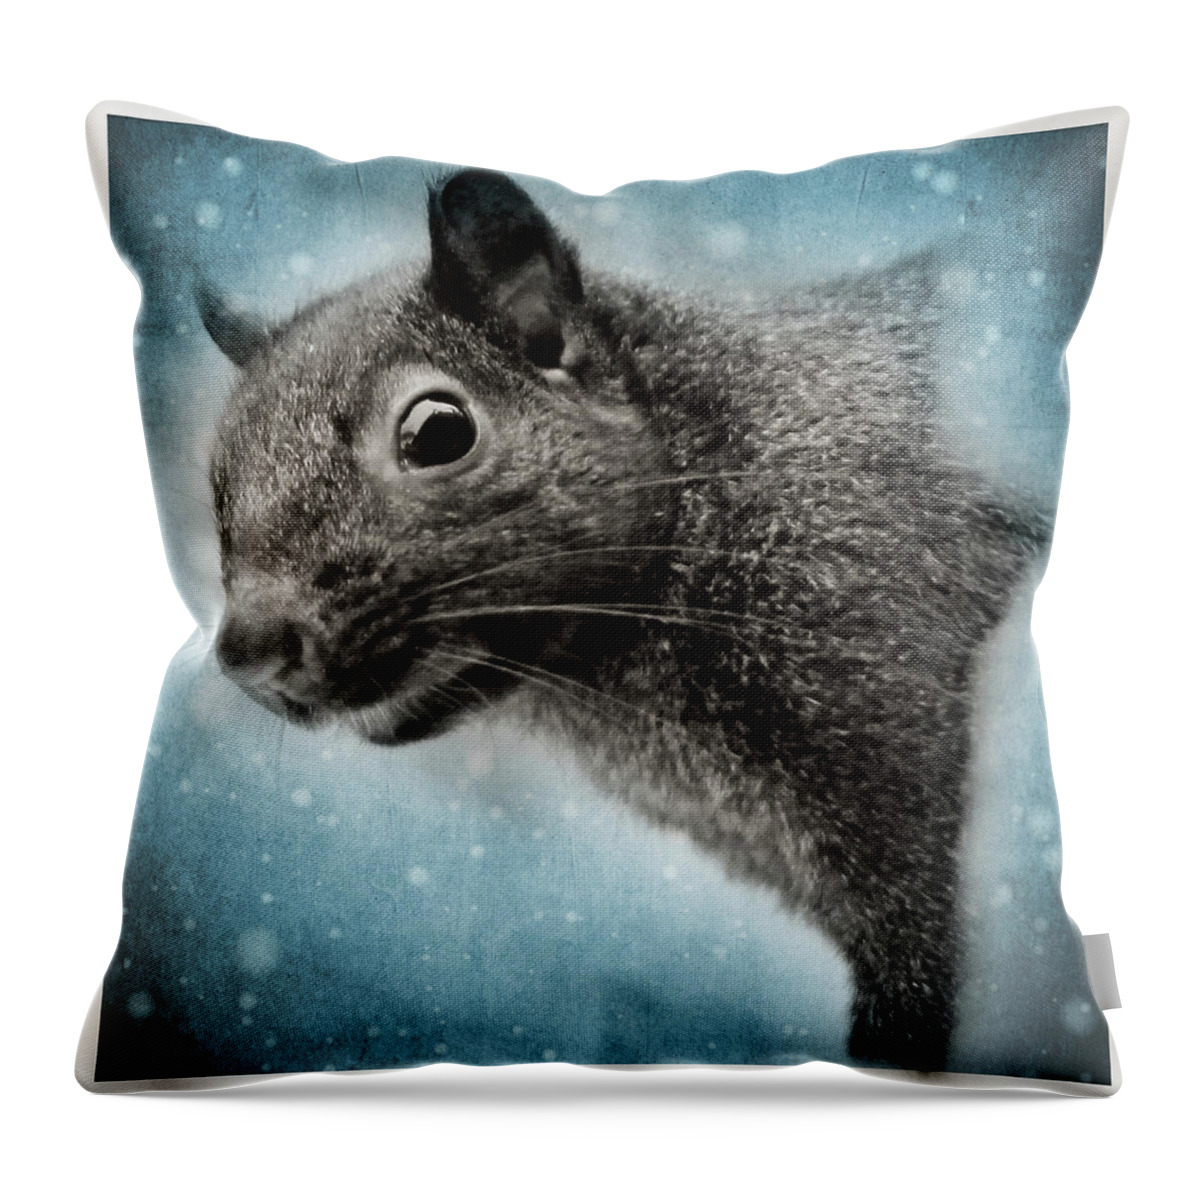 Transfer Print Throw Pillow featuring the photograph Squirrel by Photography By Gordana Adamovic Mladenovic